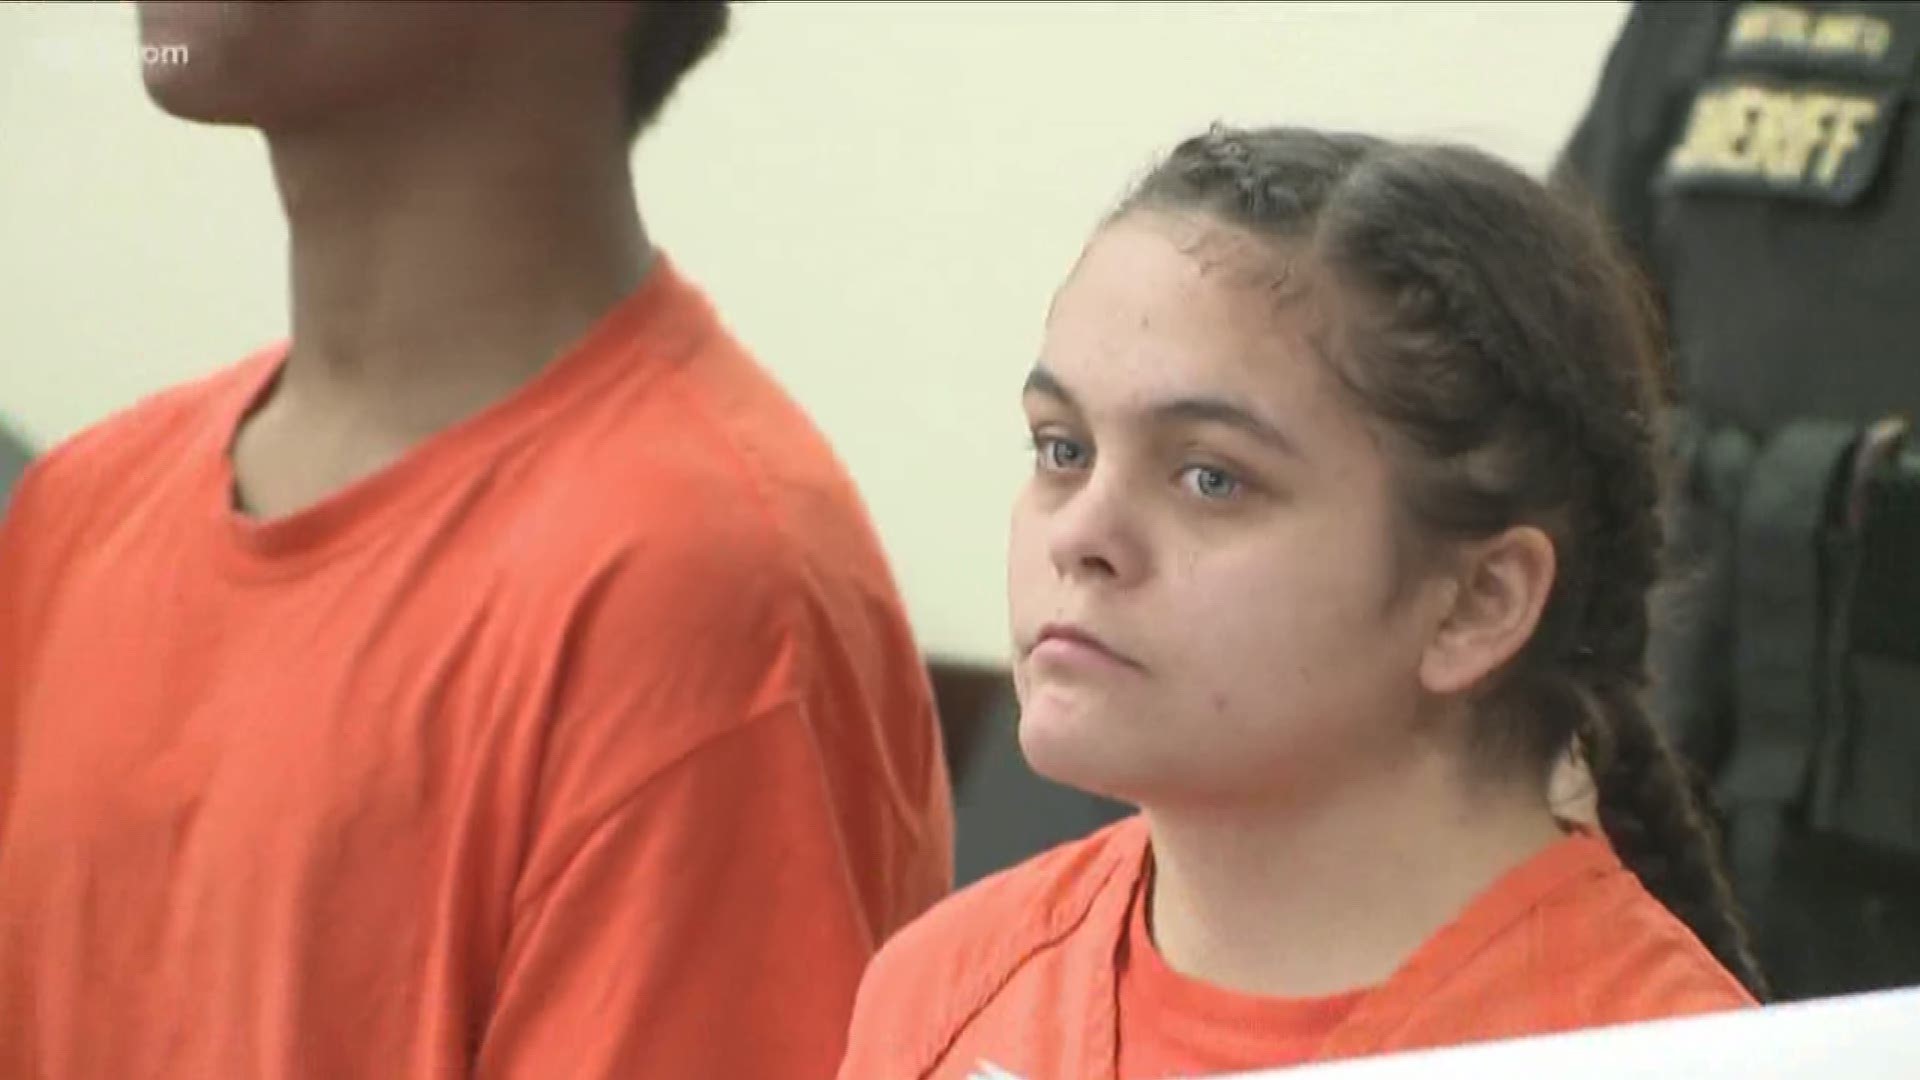 she admitted to working with her boyfriend to beat and stab 58-year-old Thomas Heath.